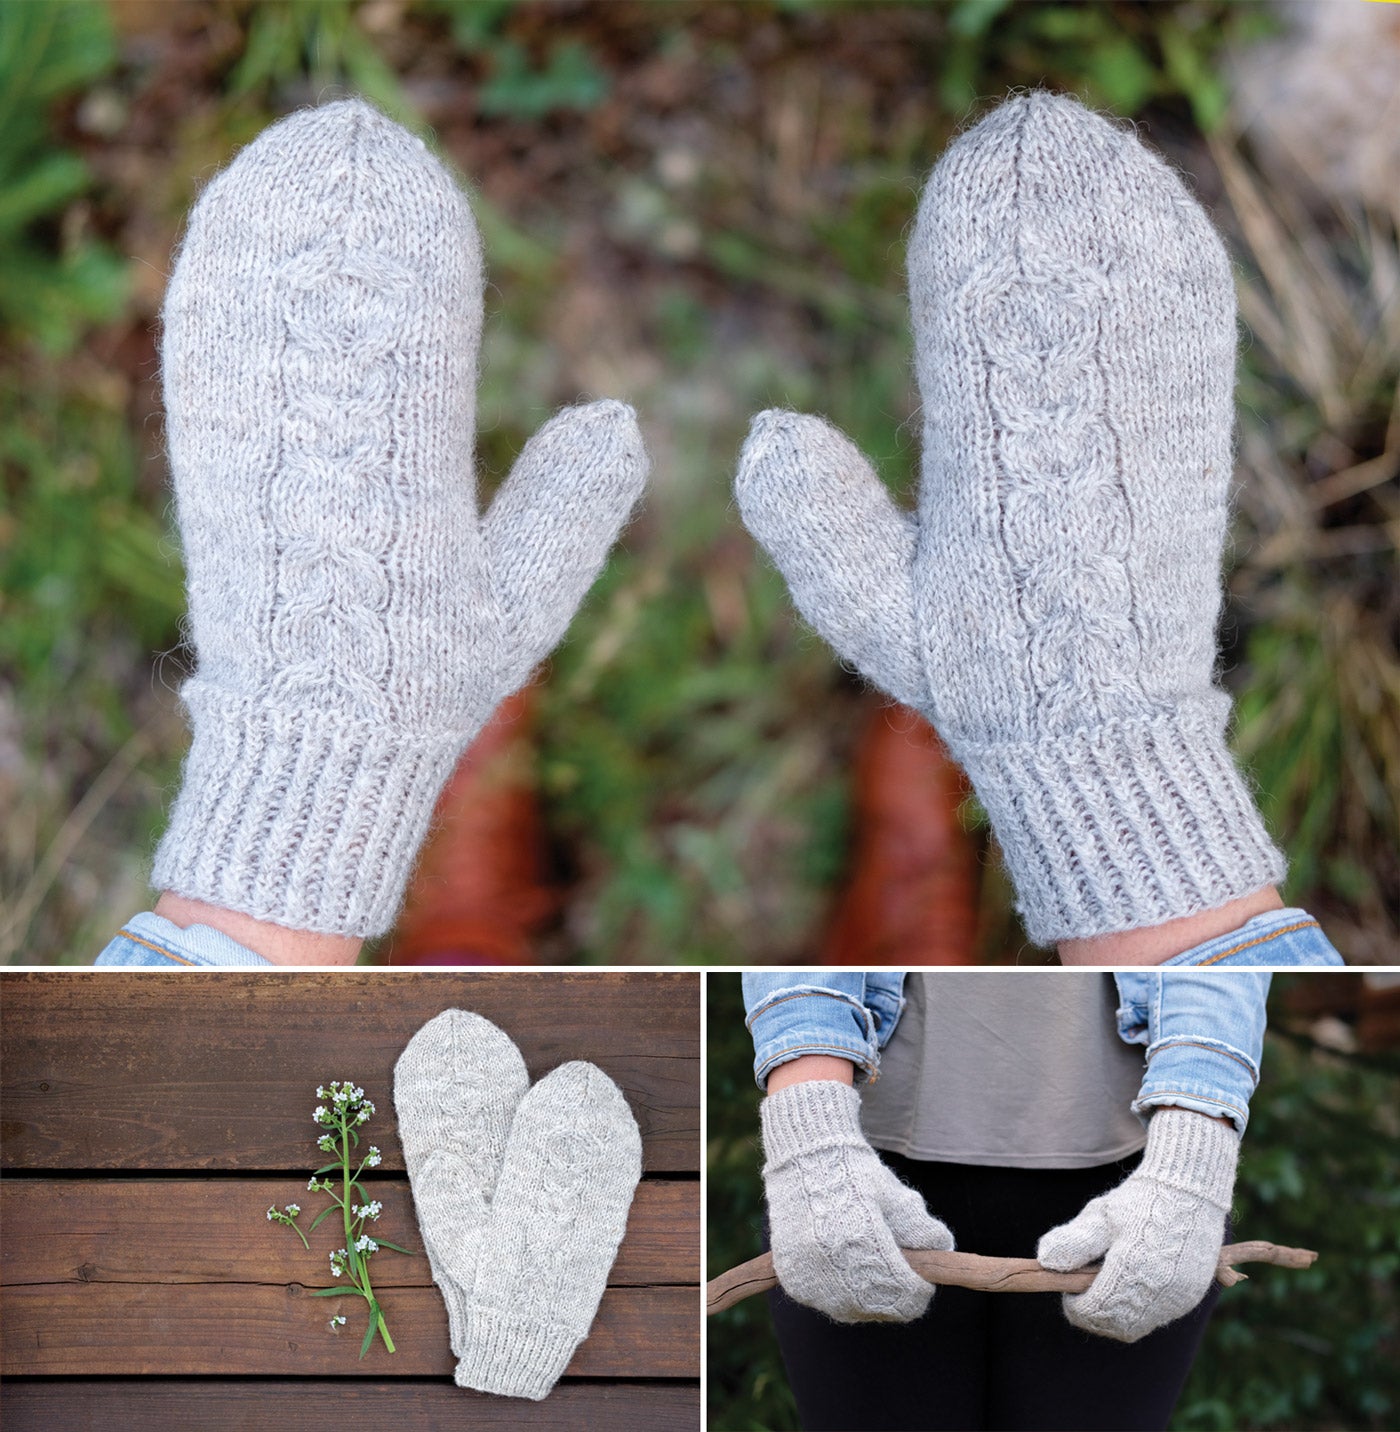 Friolero Mittens by Rae Gronmark for Yarn Along the Rockies 2018